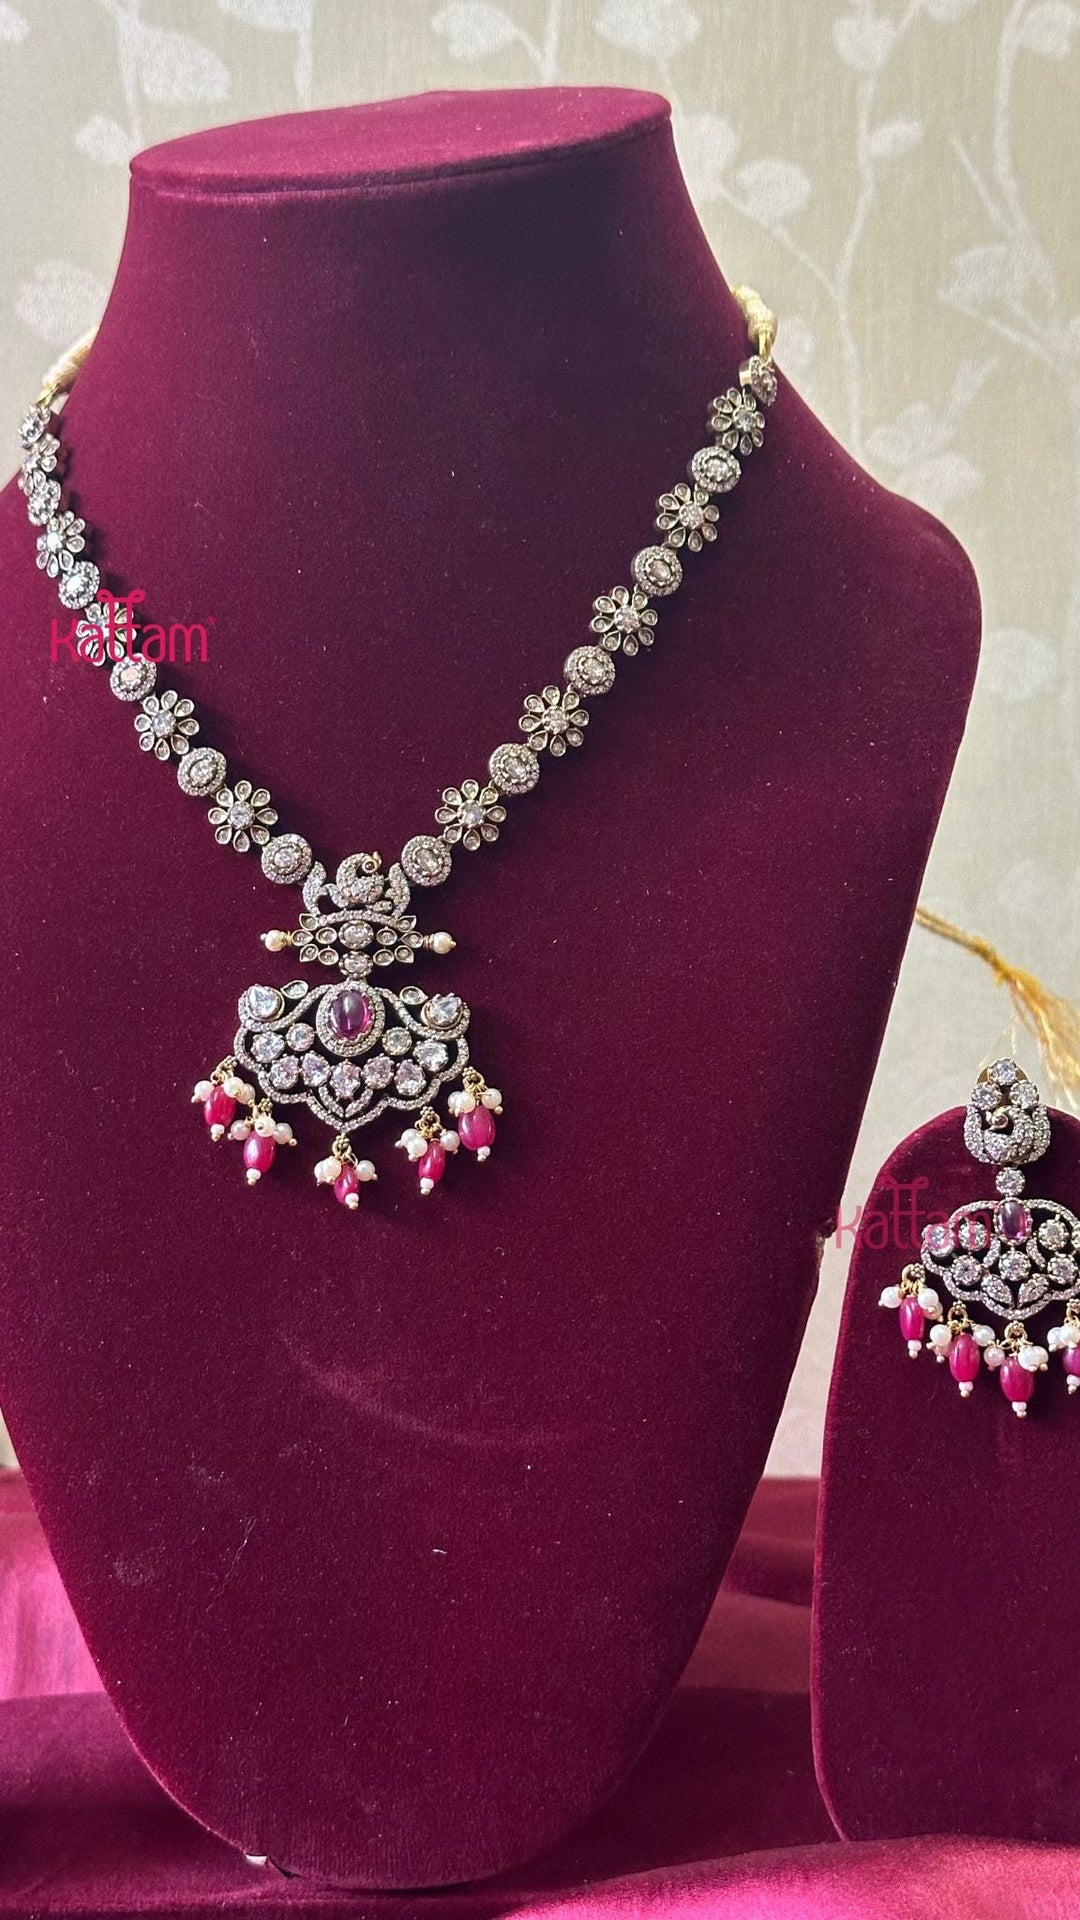 Flora Victorian AD Ruby Short Necklace - N5042